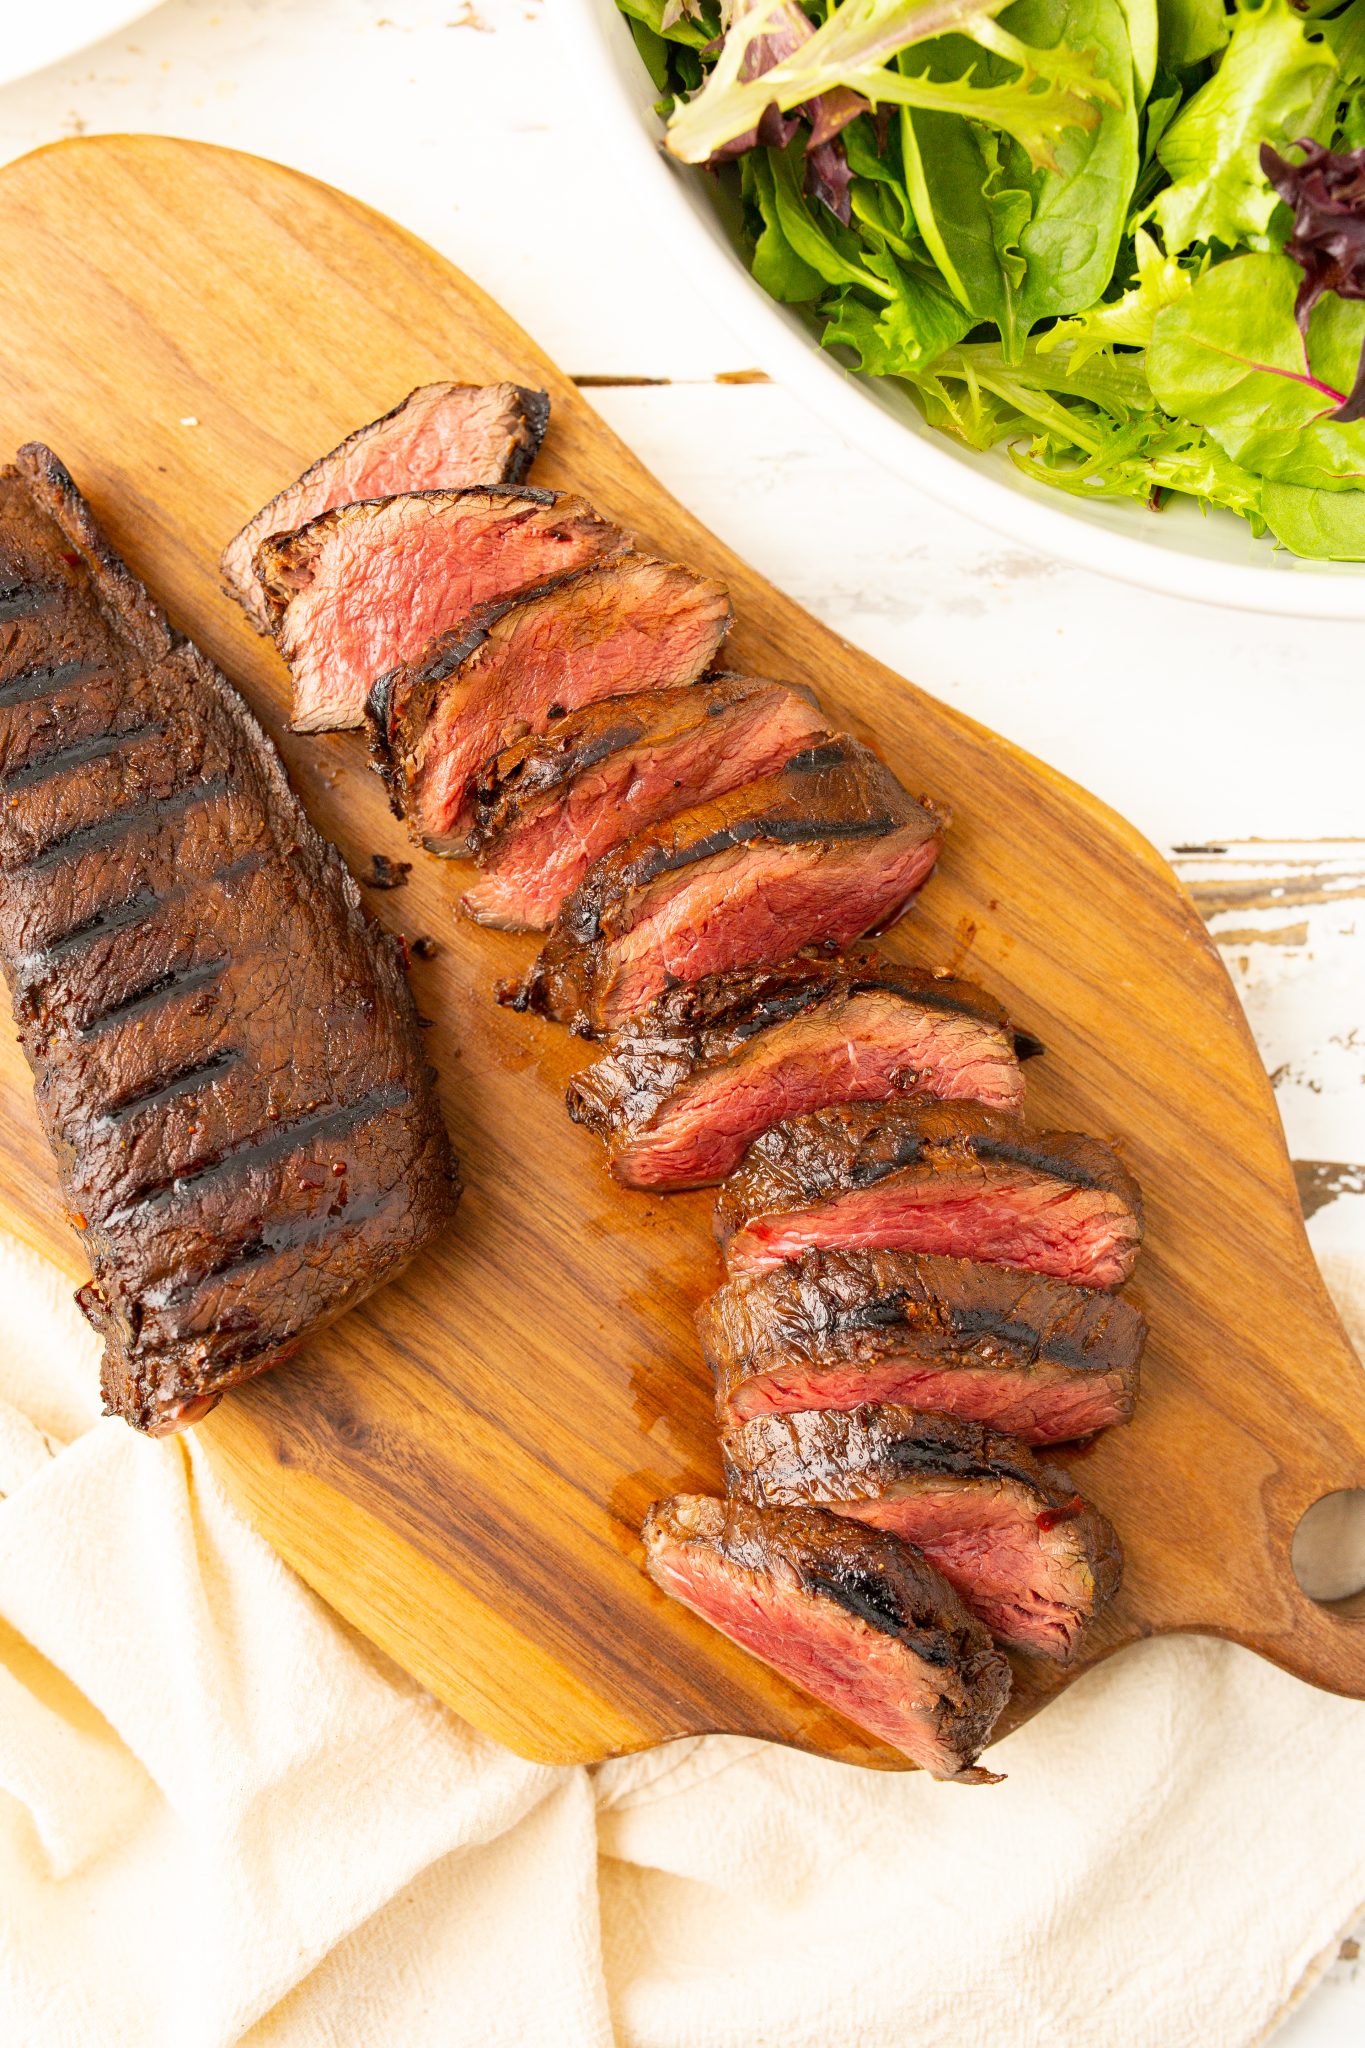 featured image of grilled venison backstrap sliced and served on a cutting board